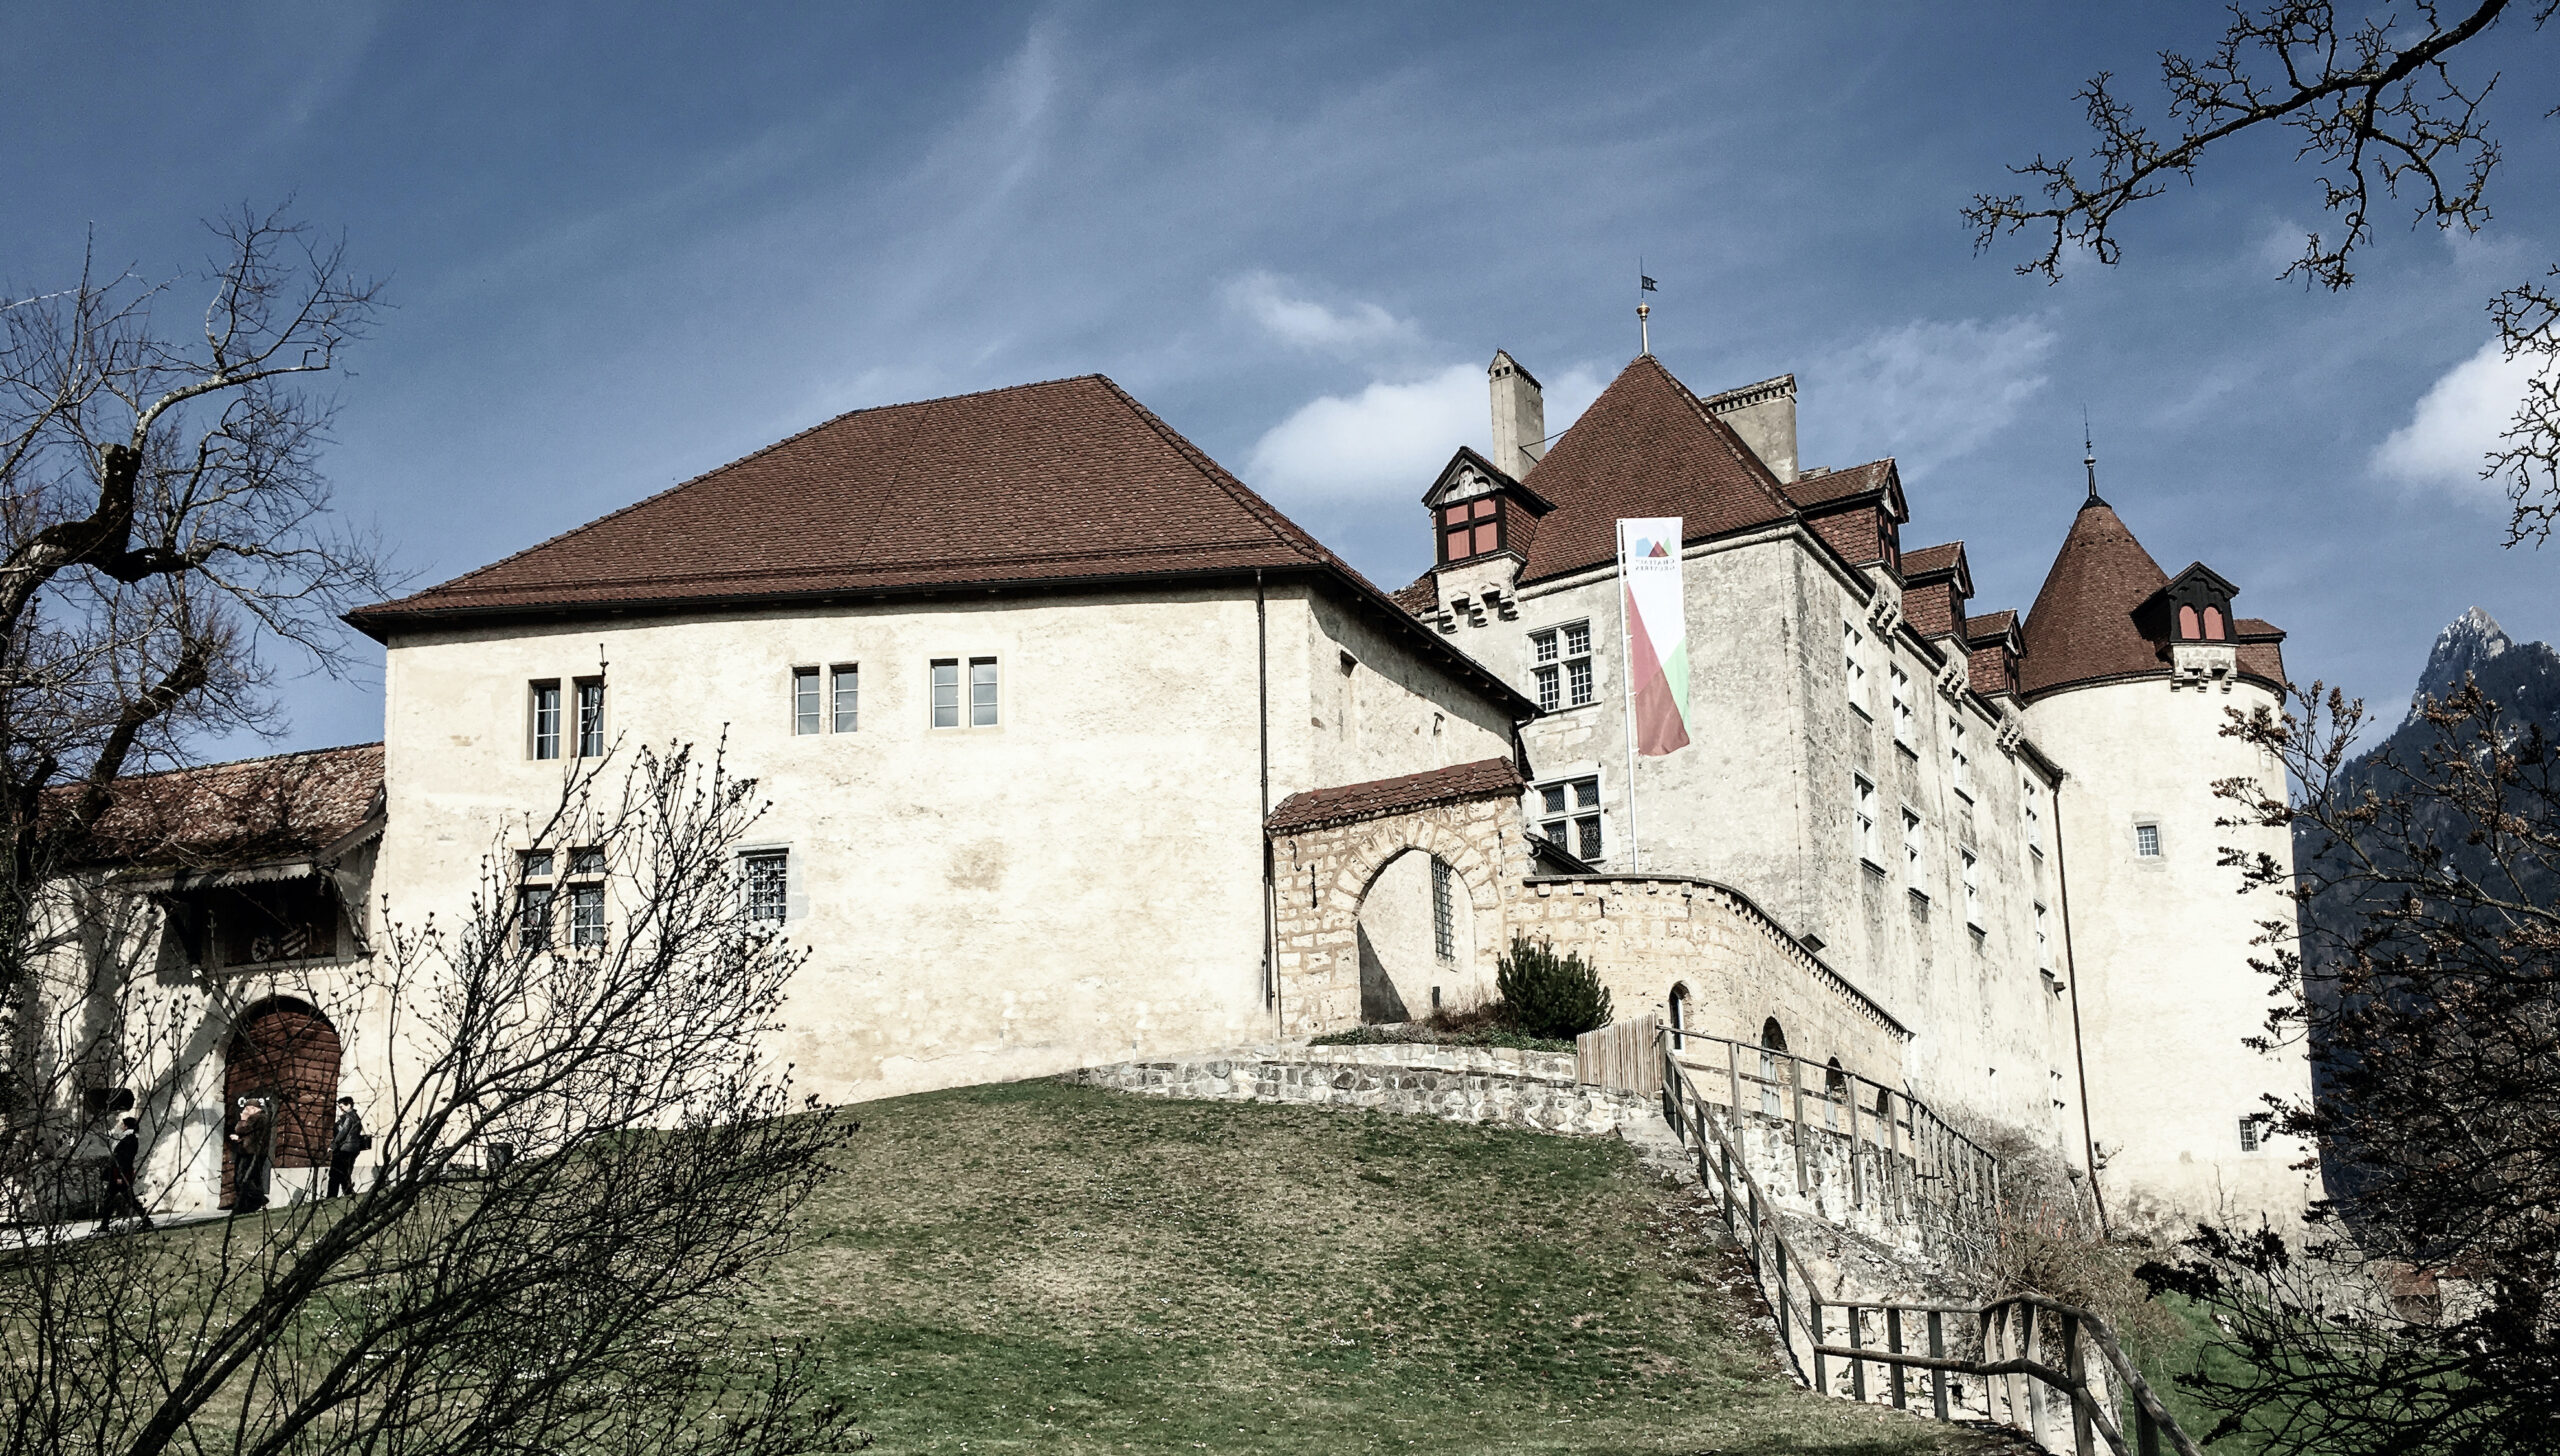 Gruyères Castle – eight centuries of a fascinating history